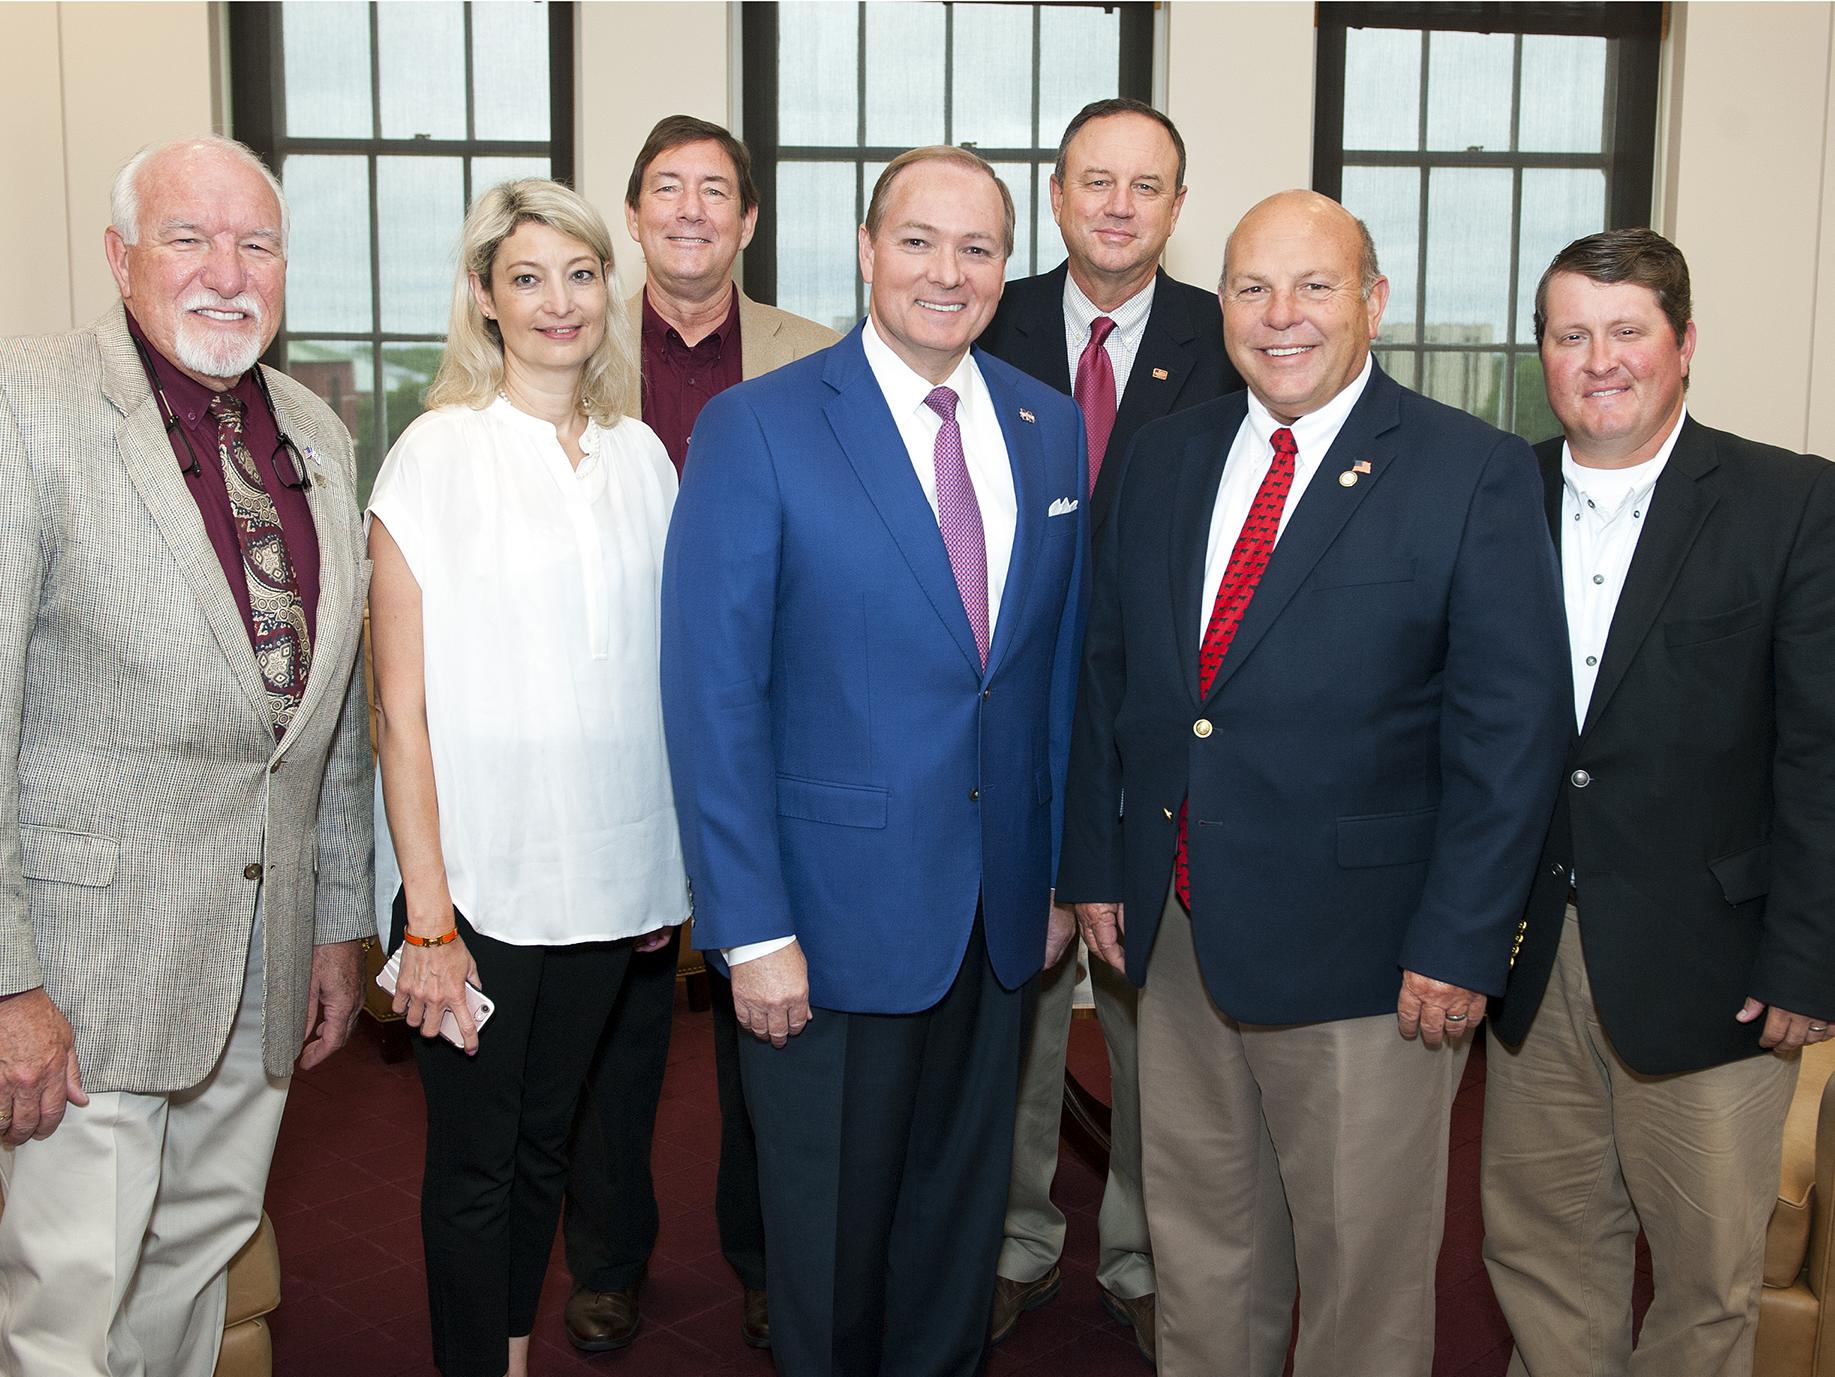 AFBF Group: Mississippi State University President Mark E. Keenum, center, met with American Farm Bureau Federation President Zippy Duvall, second from right, June 21 in Starkville, Mississippi. Duvall visited MSU for meetings with university leaders and tours of campus facilities. The meeting also included, left to right, MSU Associate Vice President for the Division of Agriculture, Forestry and Veterinary Medicine Bill Herndon; AFBF Director of Executive Communications and Projects Lynne Finnerty; MSU Vic